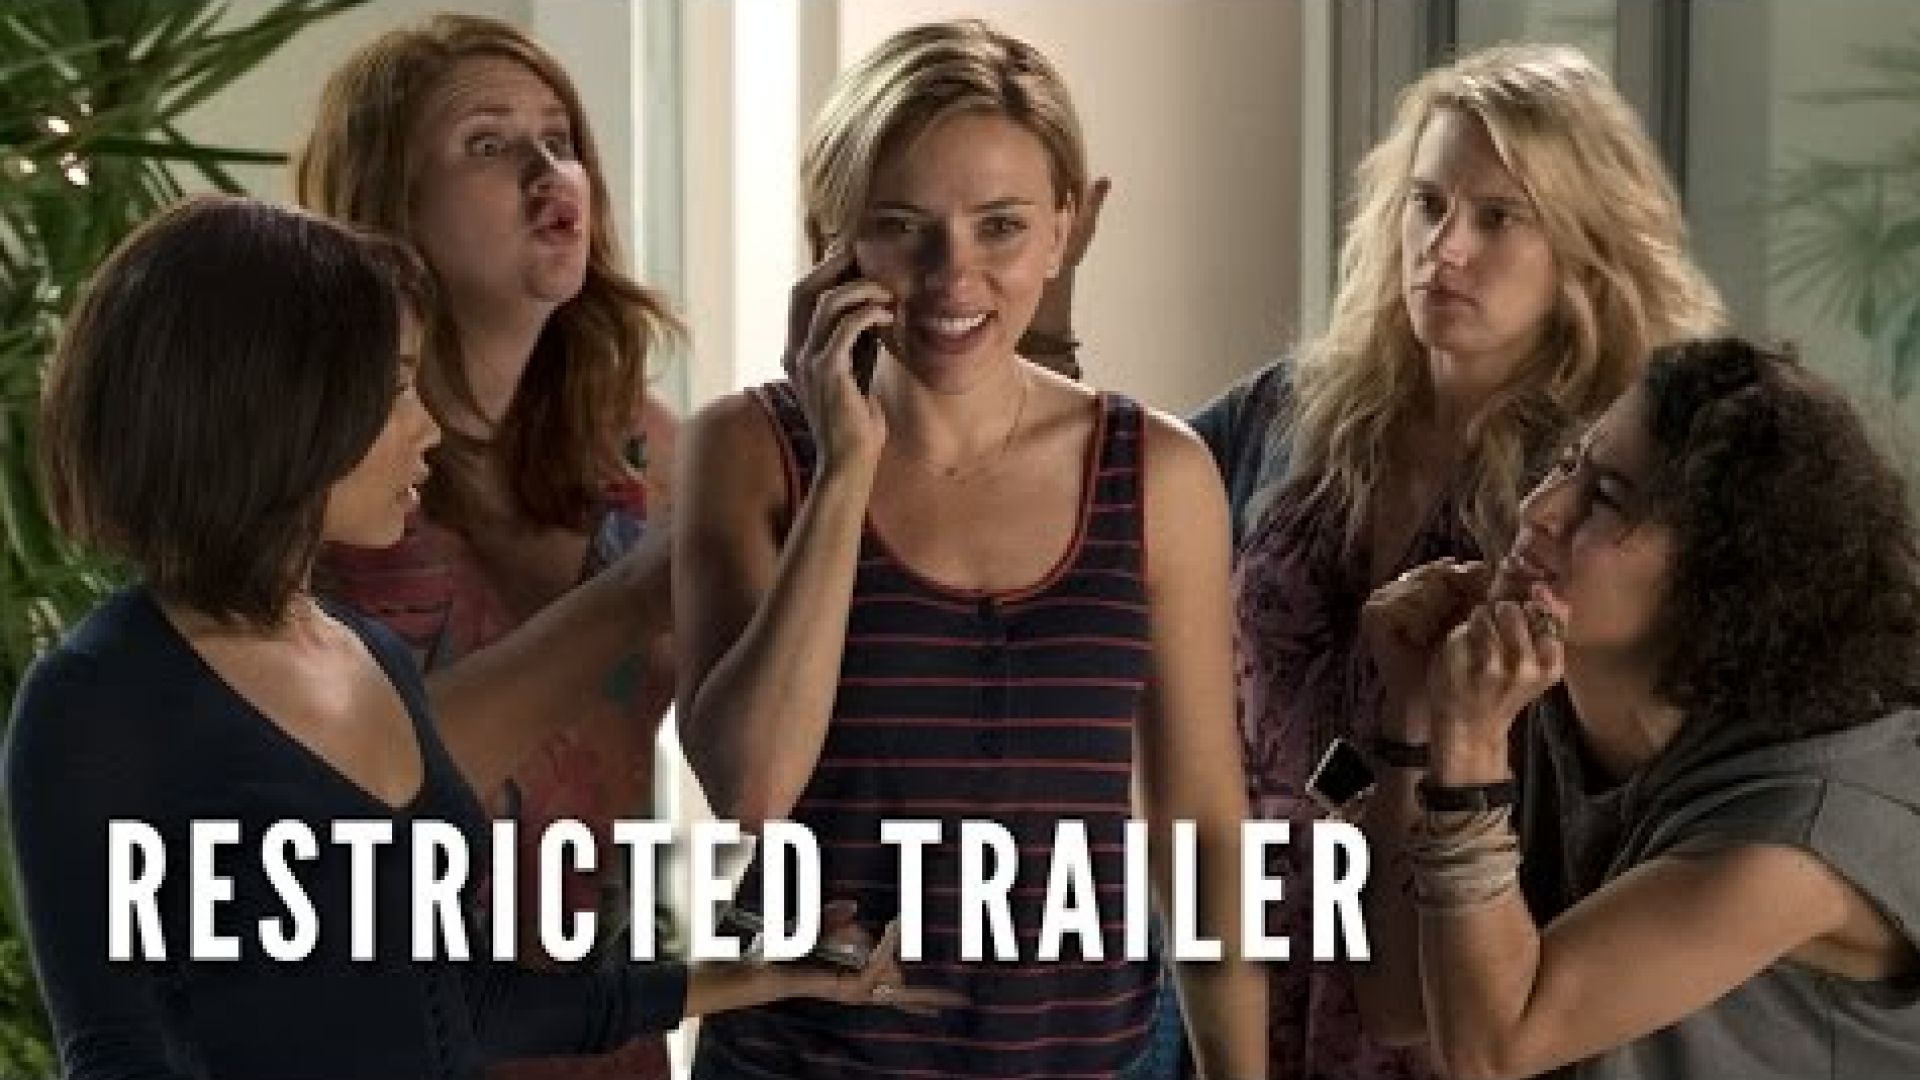 Restricted trailer for &#039;Rough Night&#039; does the Human Frientip